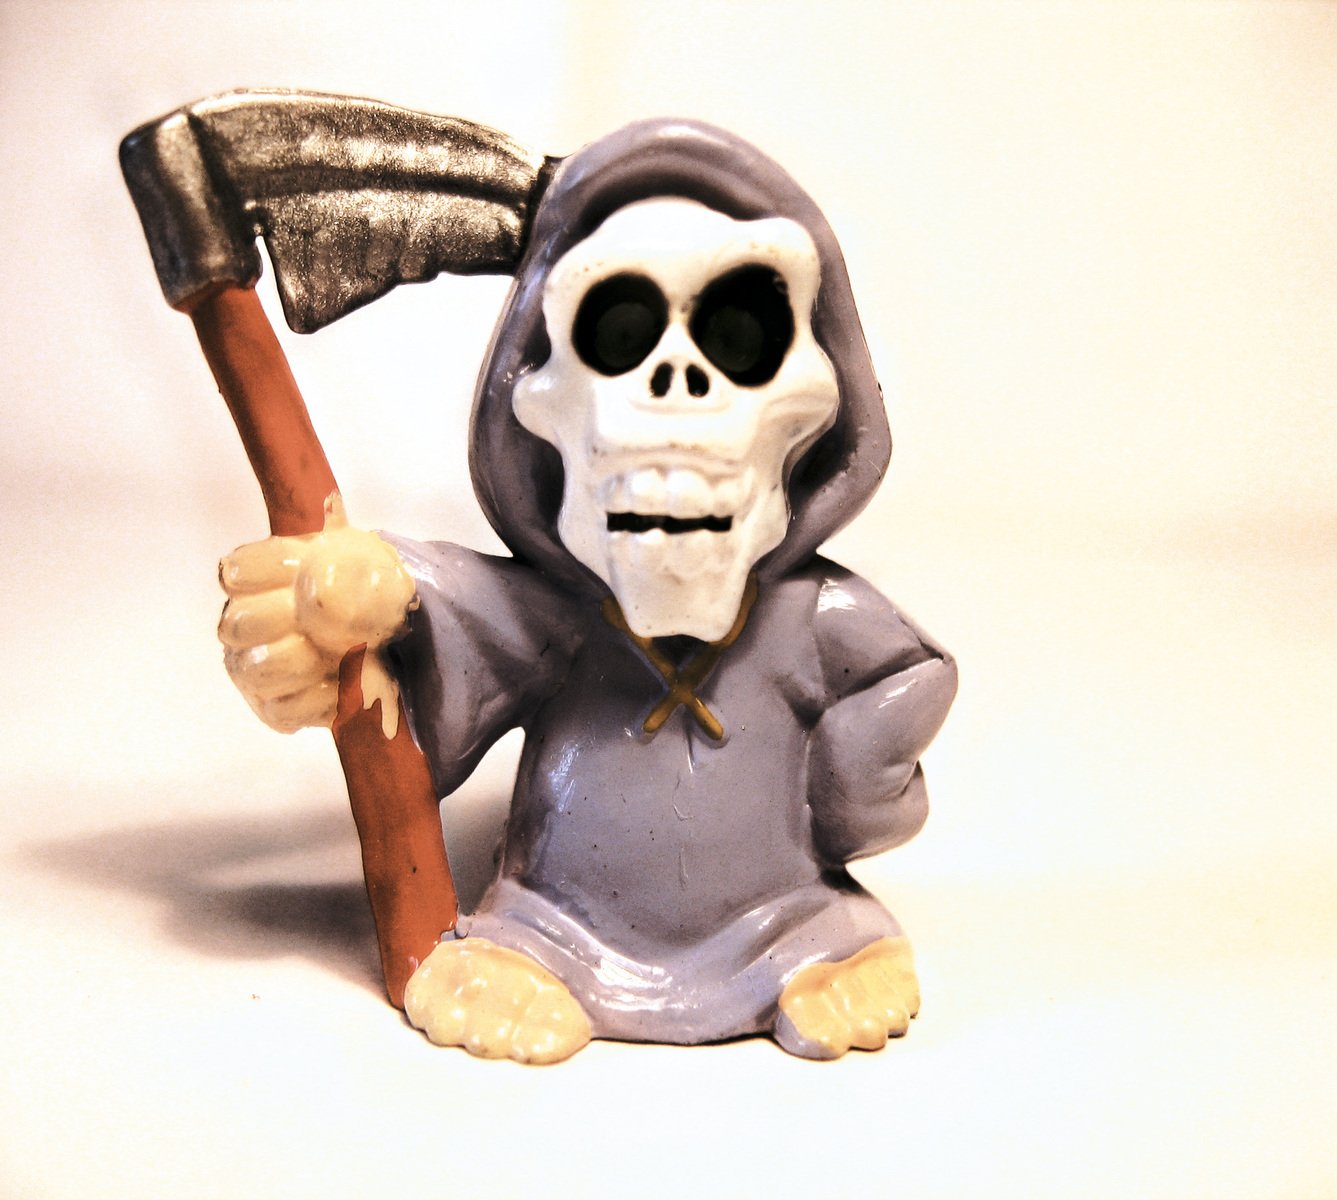 a toy figure holding an axe, which is sitting on the ground